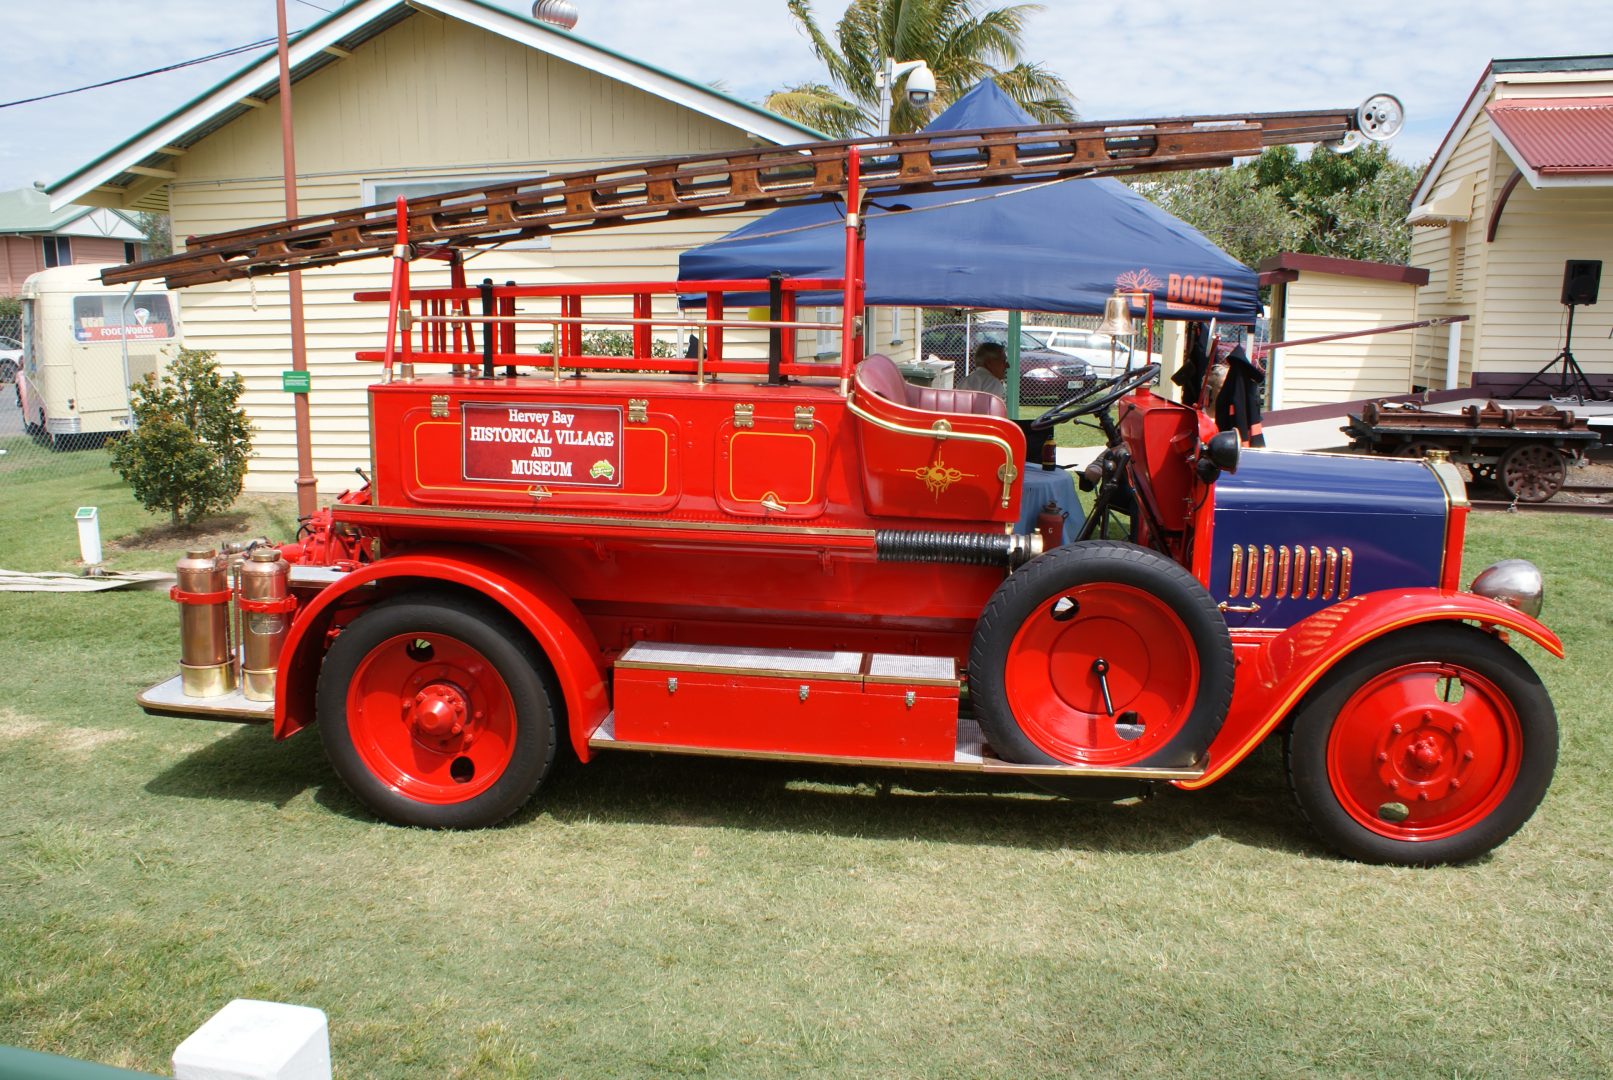 Hervey Bay Historical Village and Museum